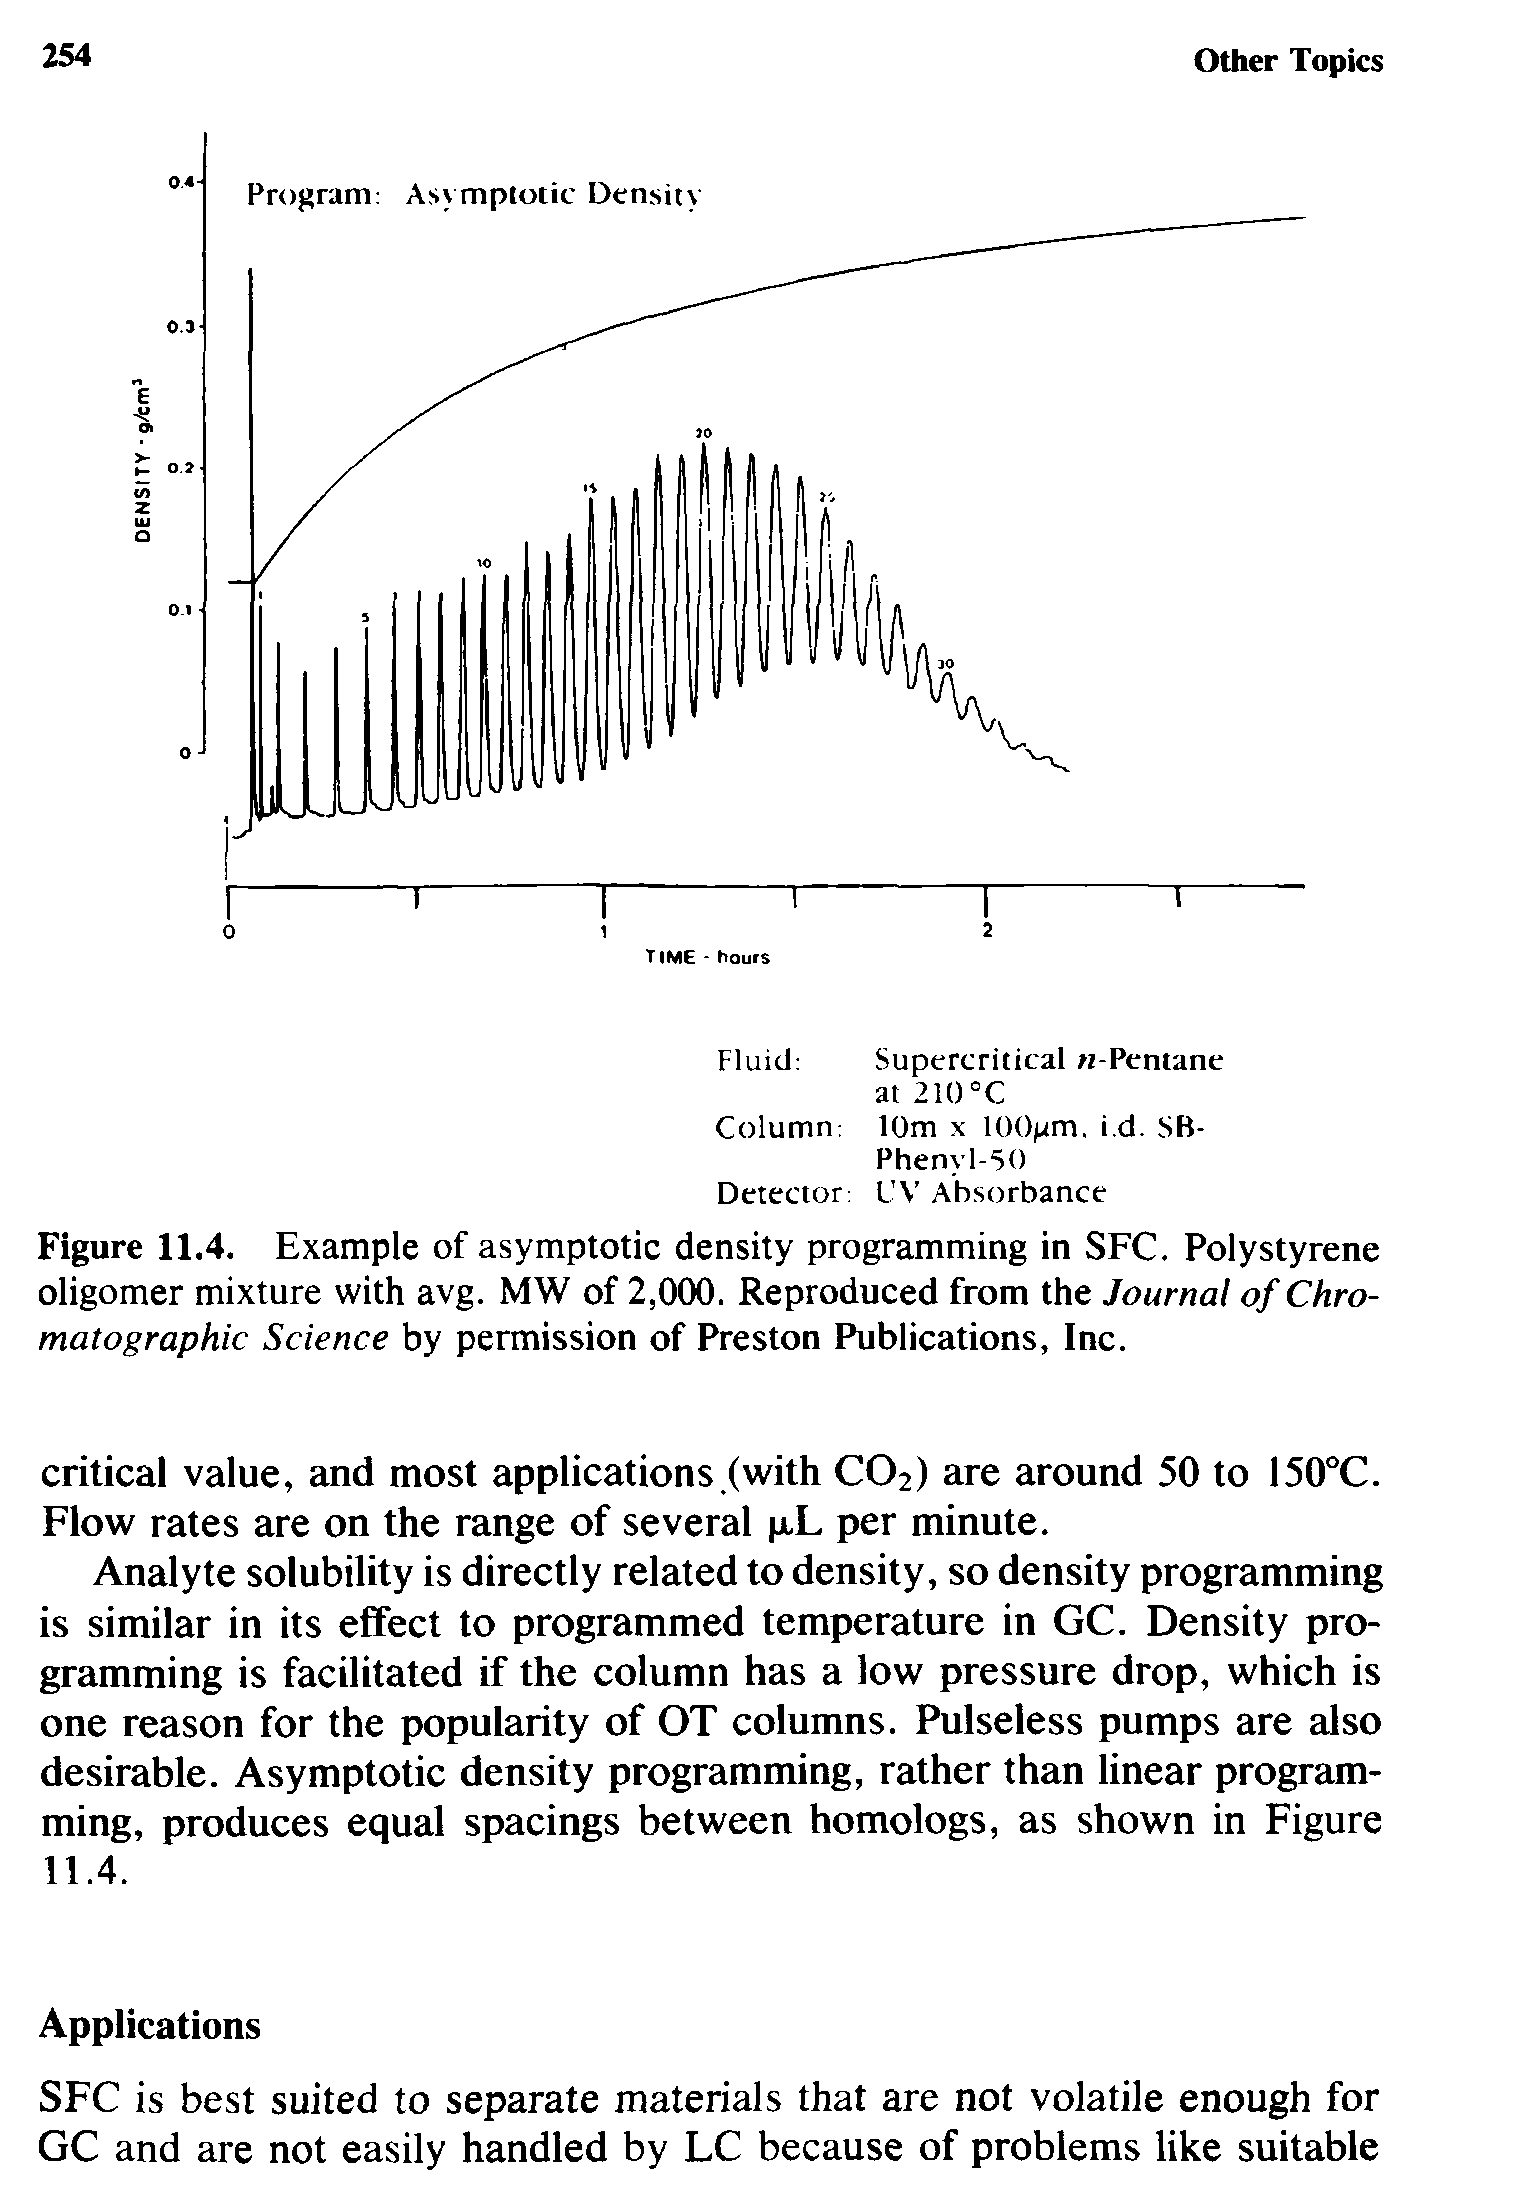 Figure 11.4. Example of asymptotic density programming in SFC. Polystyrene oligomer mixture with avg. MW of 2,000. Reproduced from the Journal of Chromatographic Science by permission of Preston Publications, Inc.